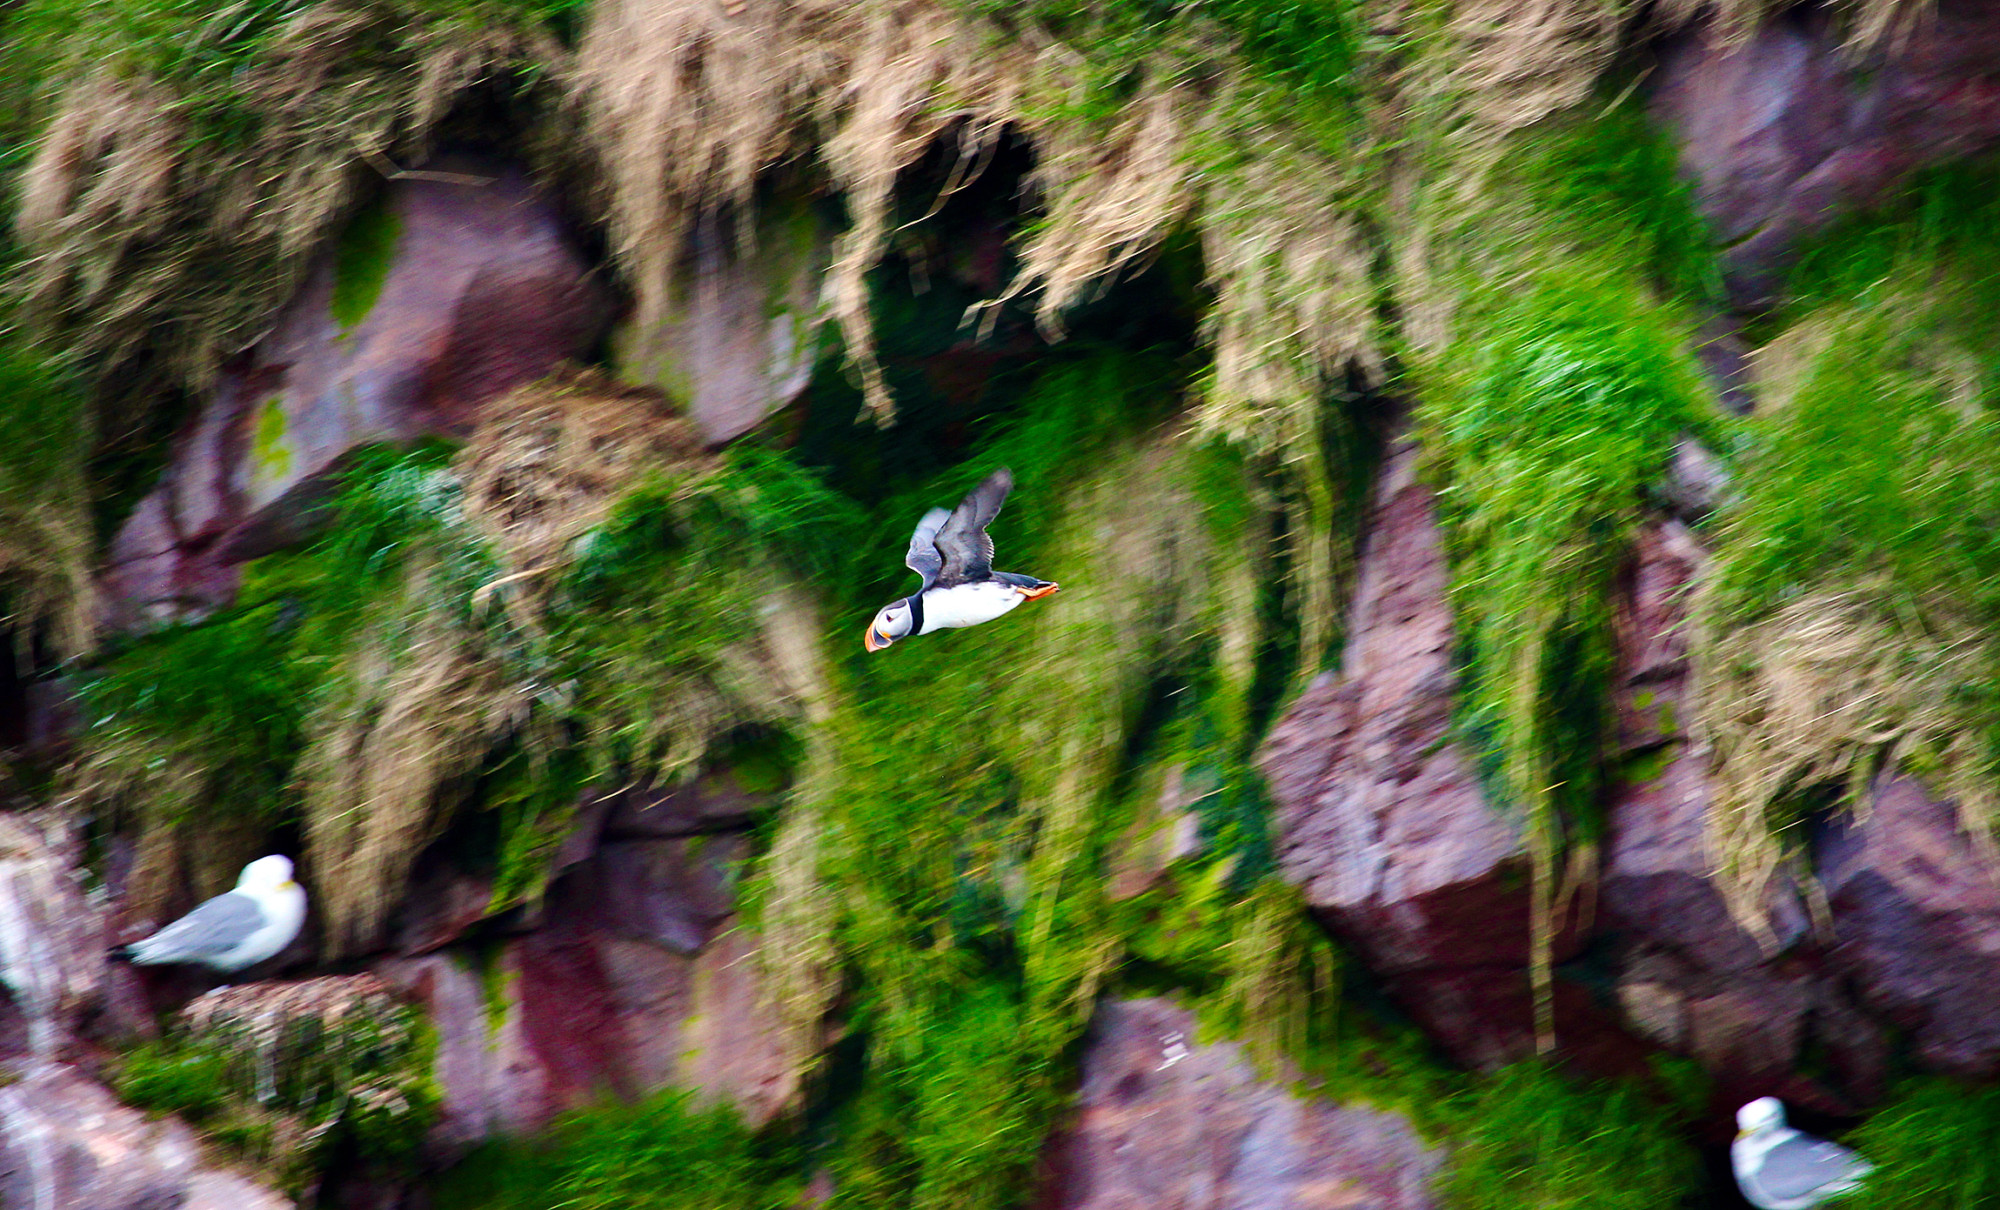 A puffin flies in Witless Bay Ecological Reserve, Newfoundland & Labrador, Canada.